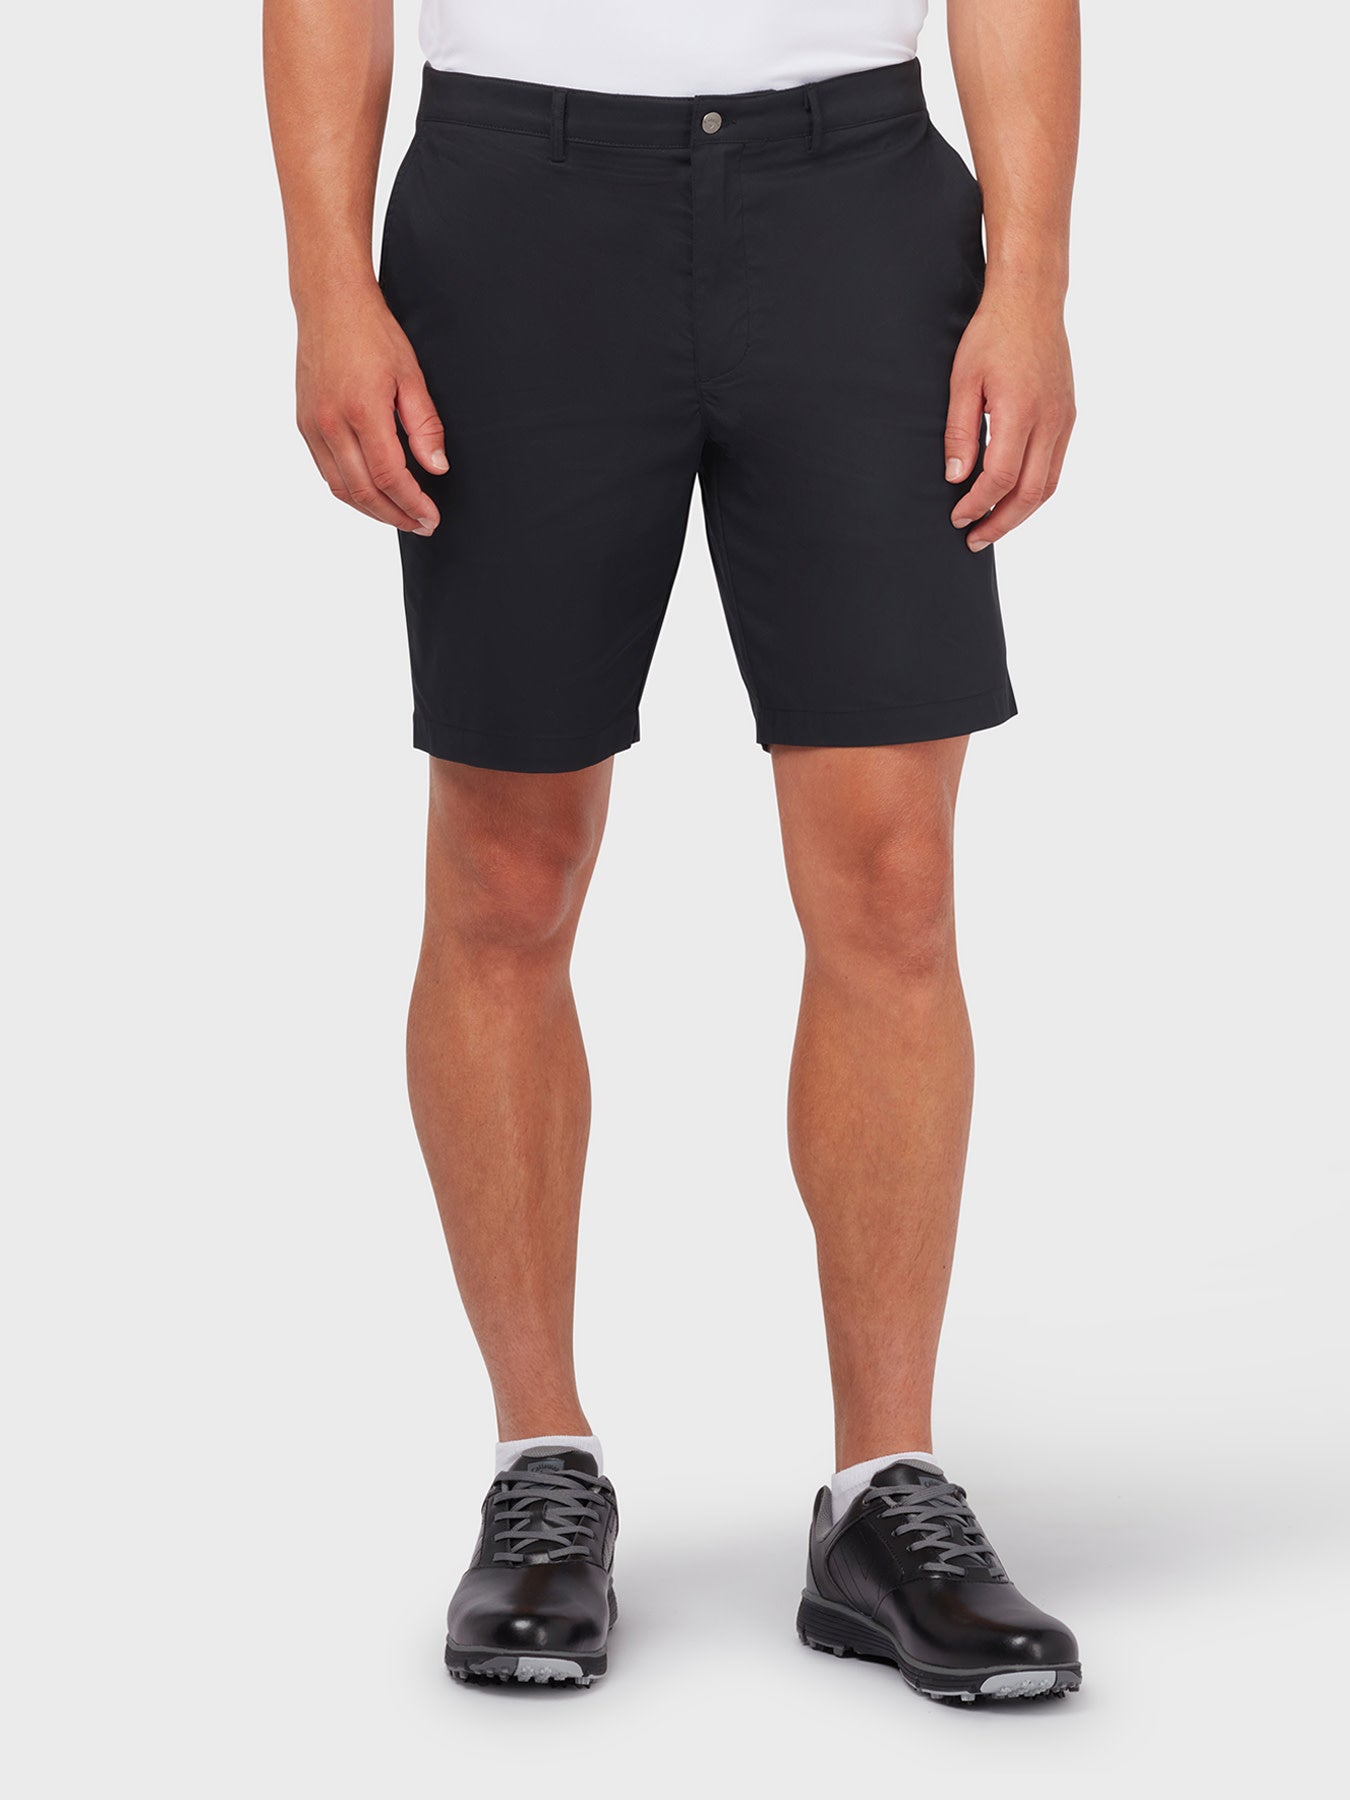 View X Series Flat Fronted Short In Caviar Caviar 42 information